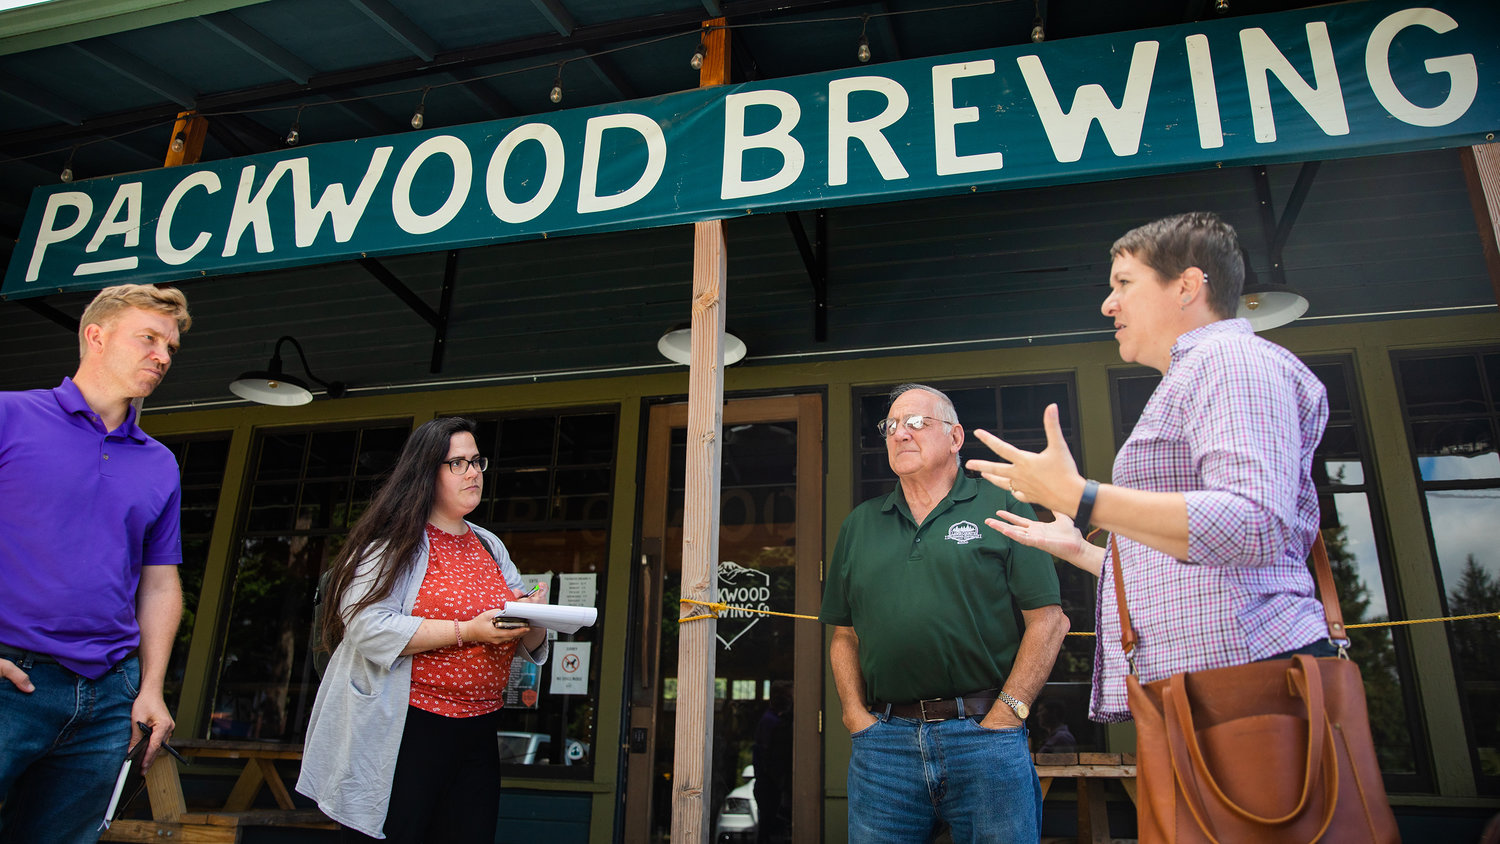 Lewis County Senior Long Range Planner Mindy Brooks, far right, and Commissioner Lee Grose talk with representatives from U.S. Congresswoman Jamie Herrera Beutler’s and Senator Maria Cantwell’s offices Thursday outside the Packwood Brewing Co.